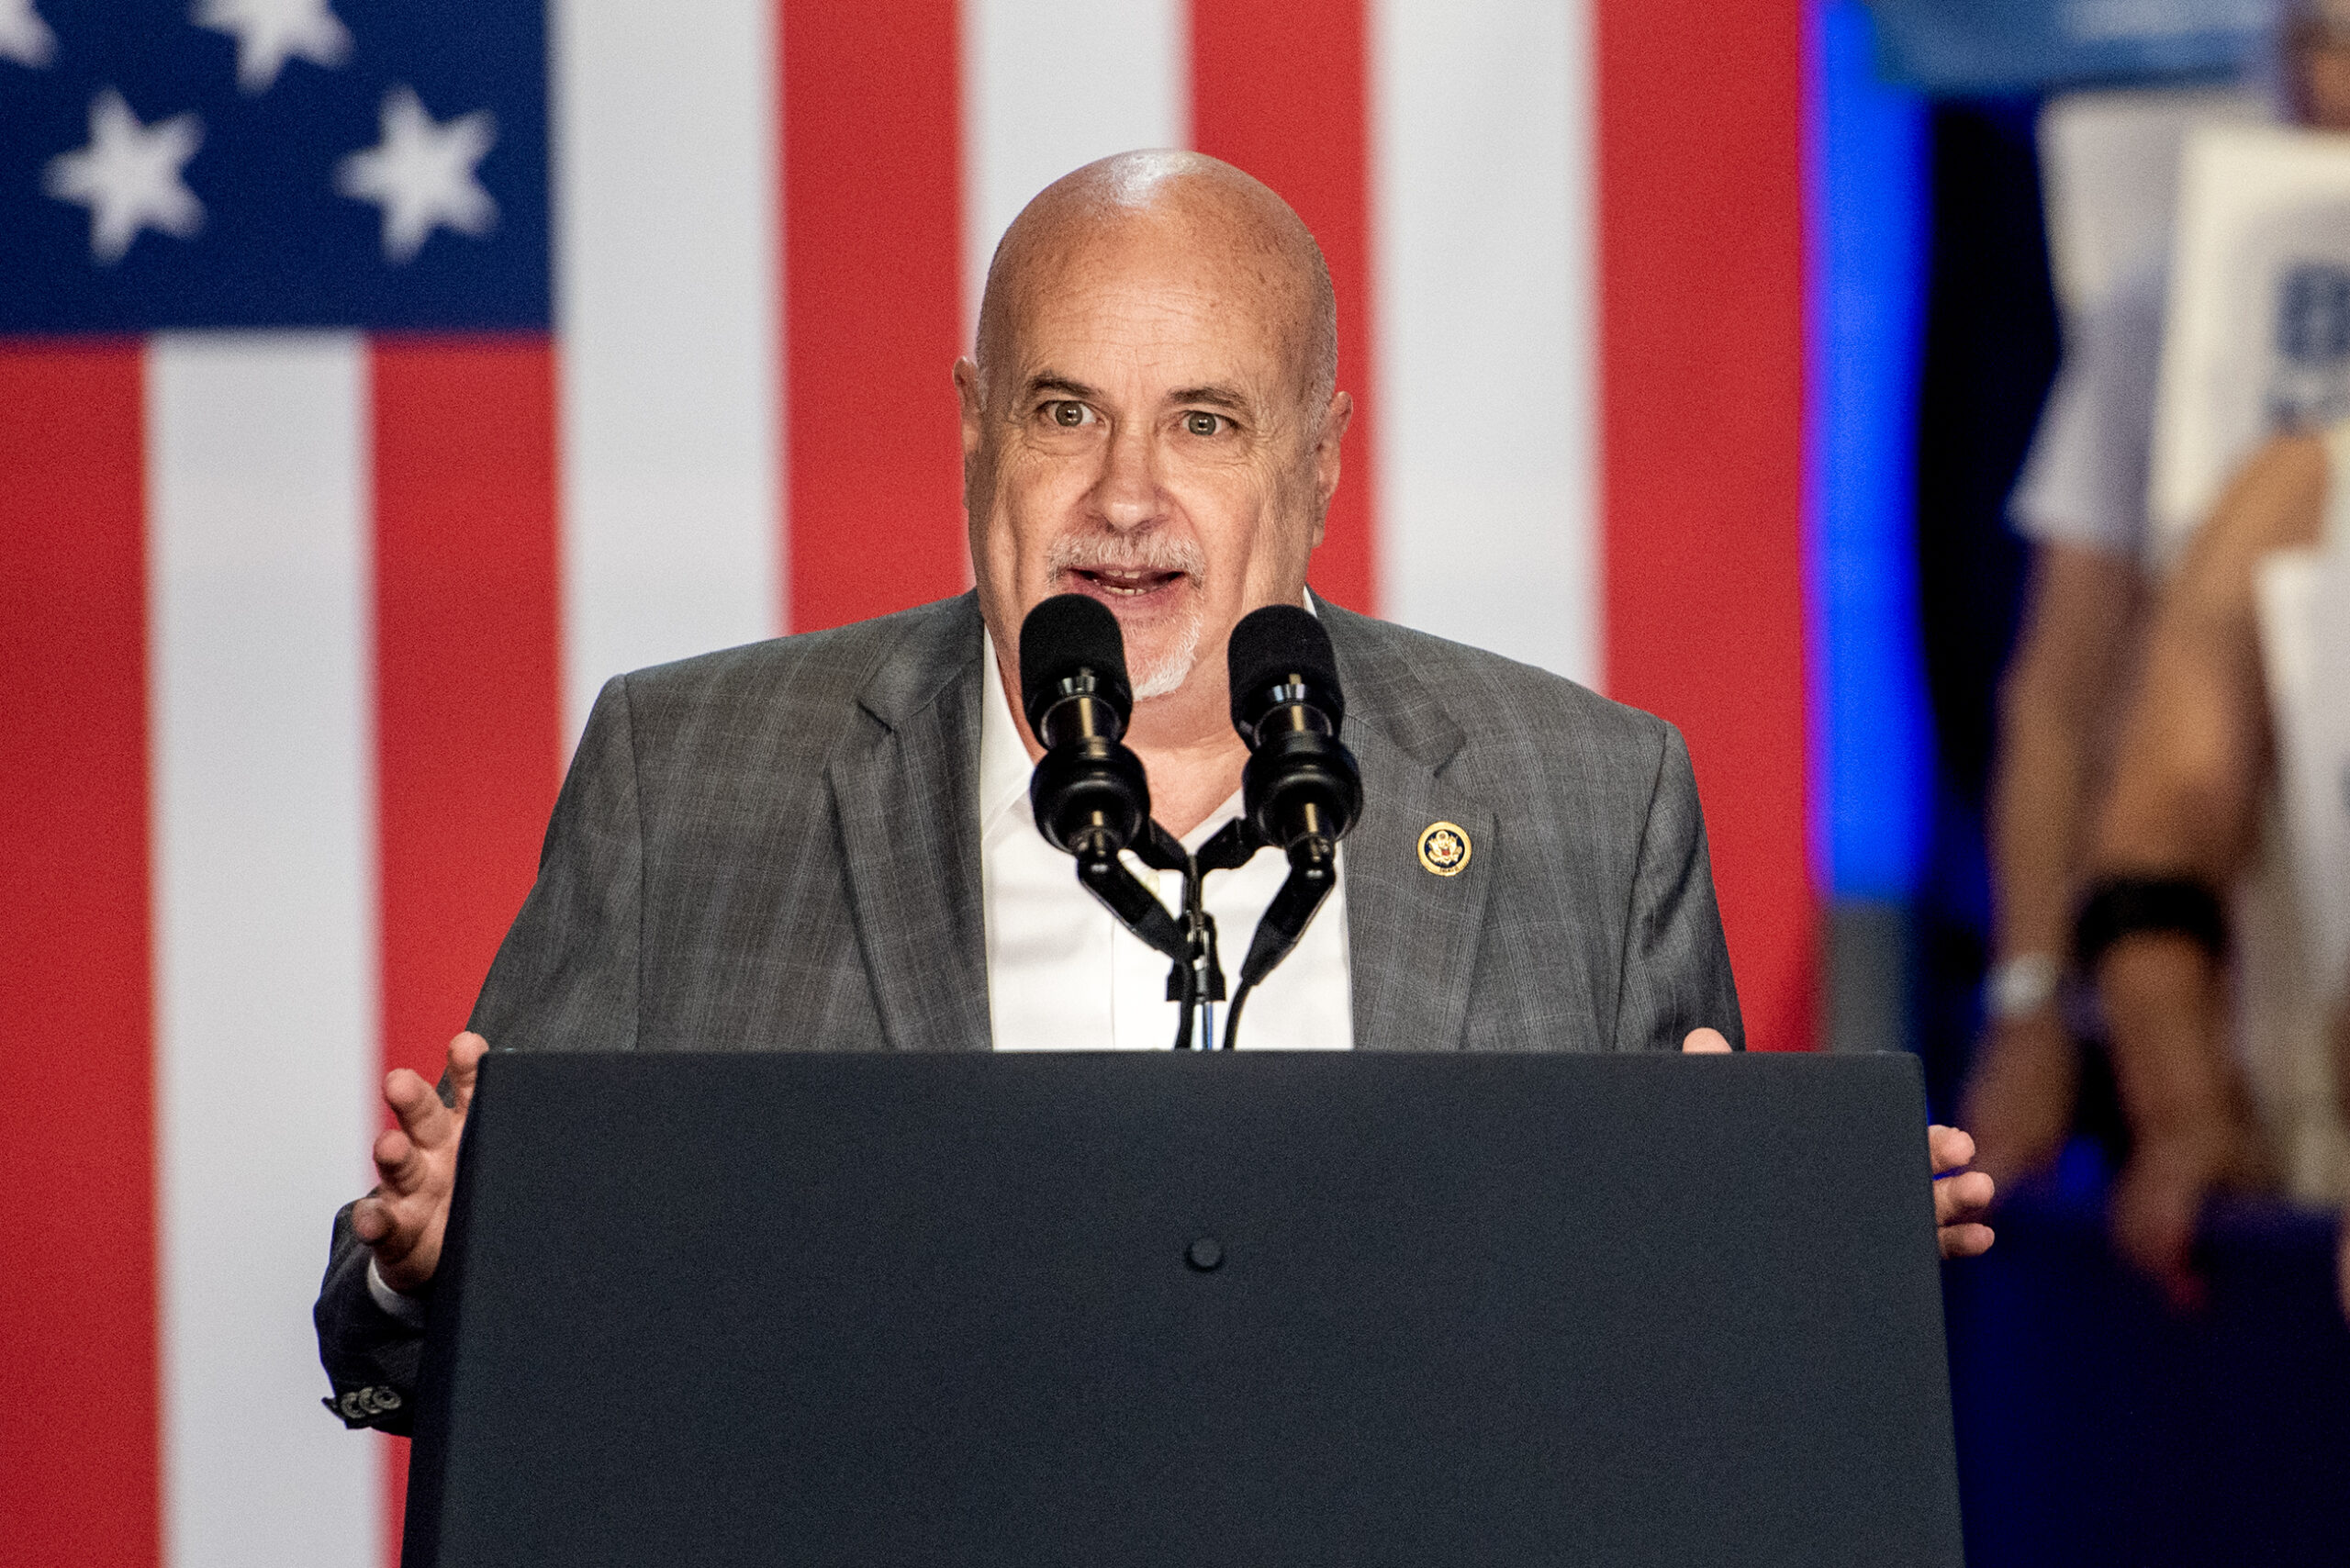 Wisconsin US Rep. Mark Pocan joins calls for Biden to drop out